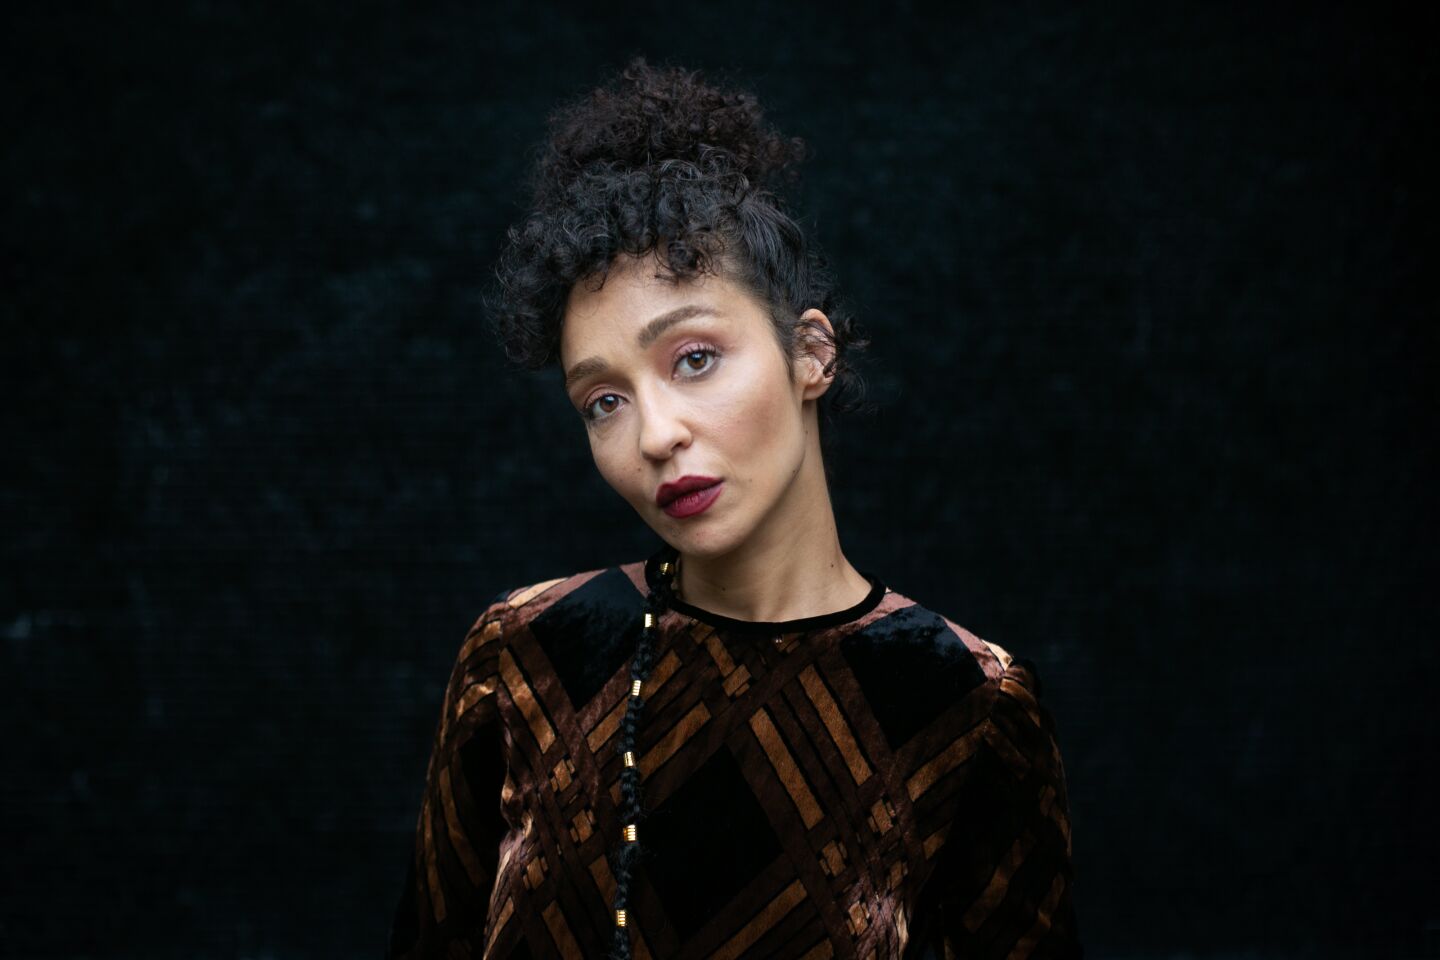 "I'm so fascinated with the color line and the ridiculousness of race, I wanted to explore what it was to literally f— with it [and explore] what it feels like to be this woman who is actually wielding so much power, but secretly," Ruth Negga says of her role in "Passing."